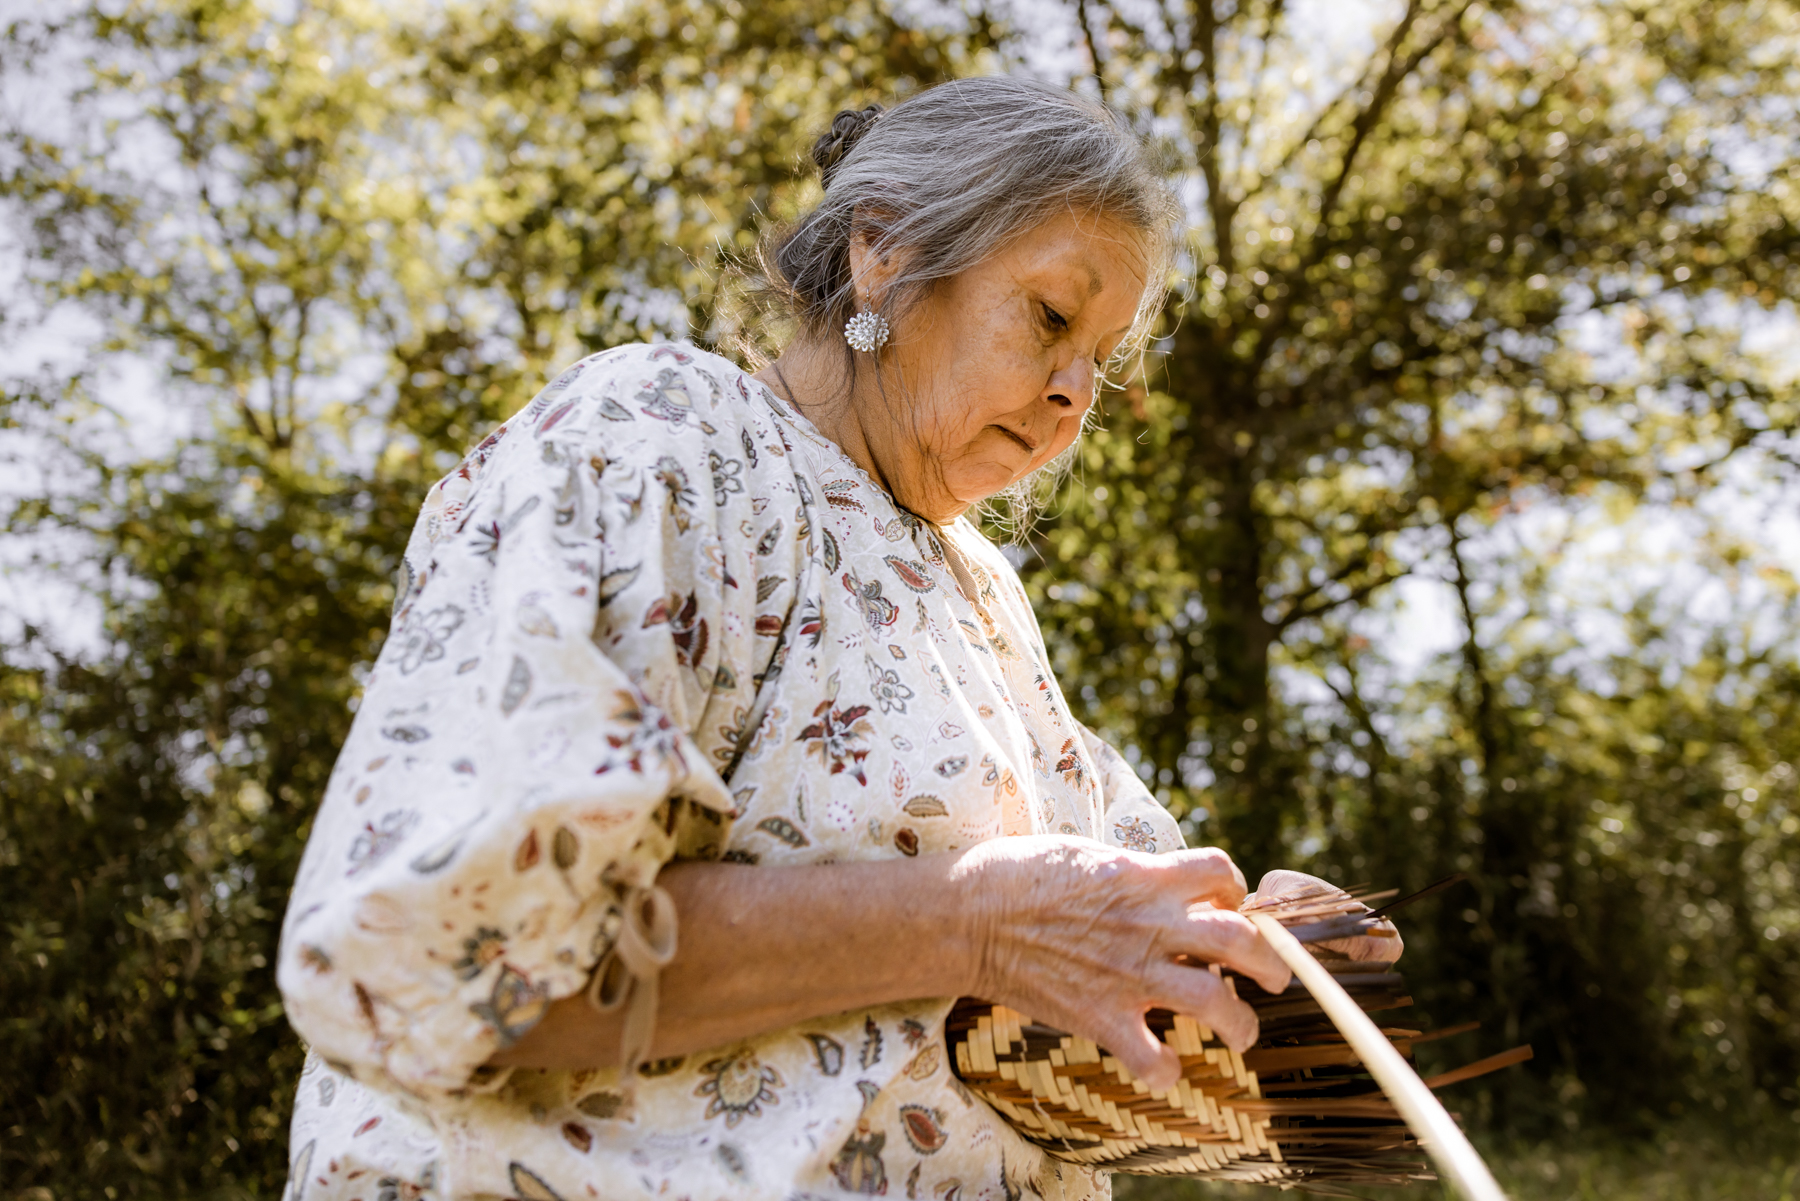 To Gv-di (Weave) is to tell a ka-no-he-s-gi (story). Mary, a rivercane basket maker honors the gift of water and the rivercane, weaving them together to tell the story of the Cherokee people.